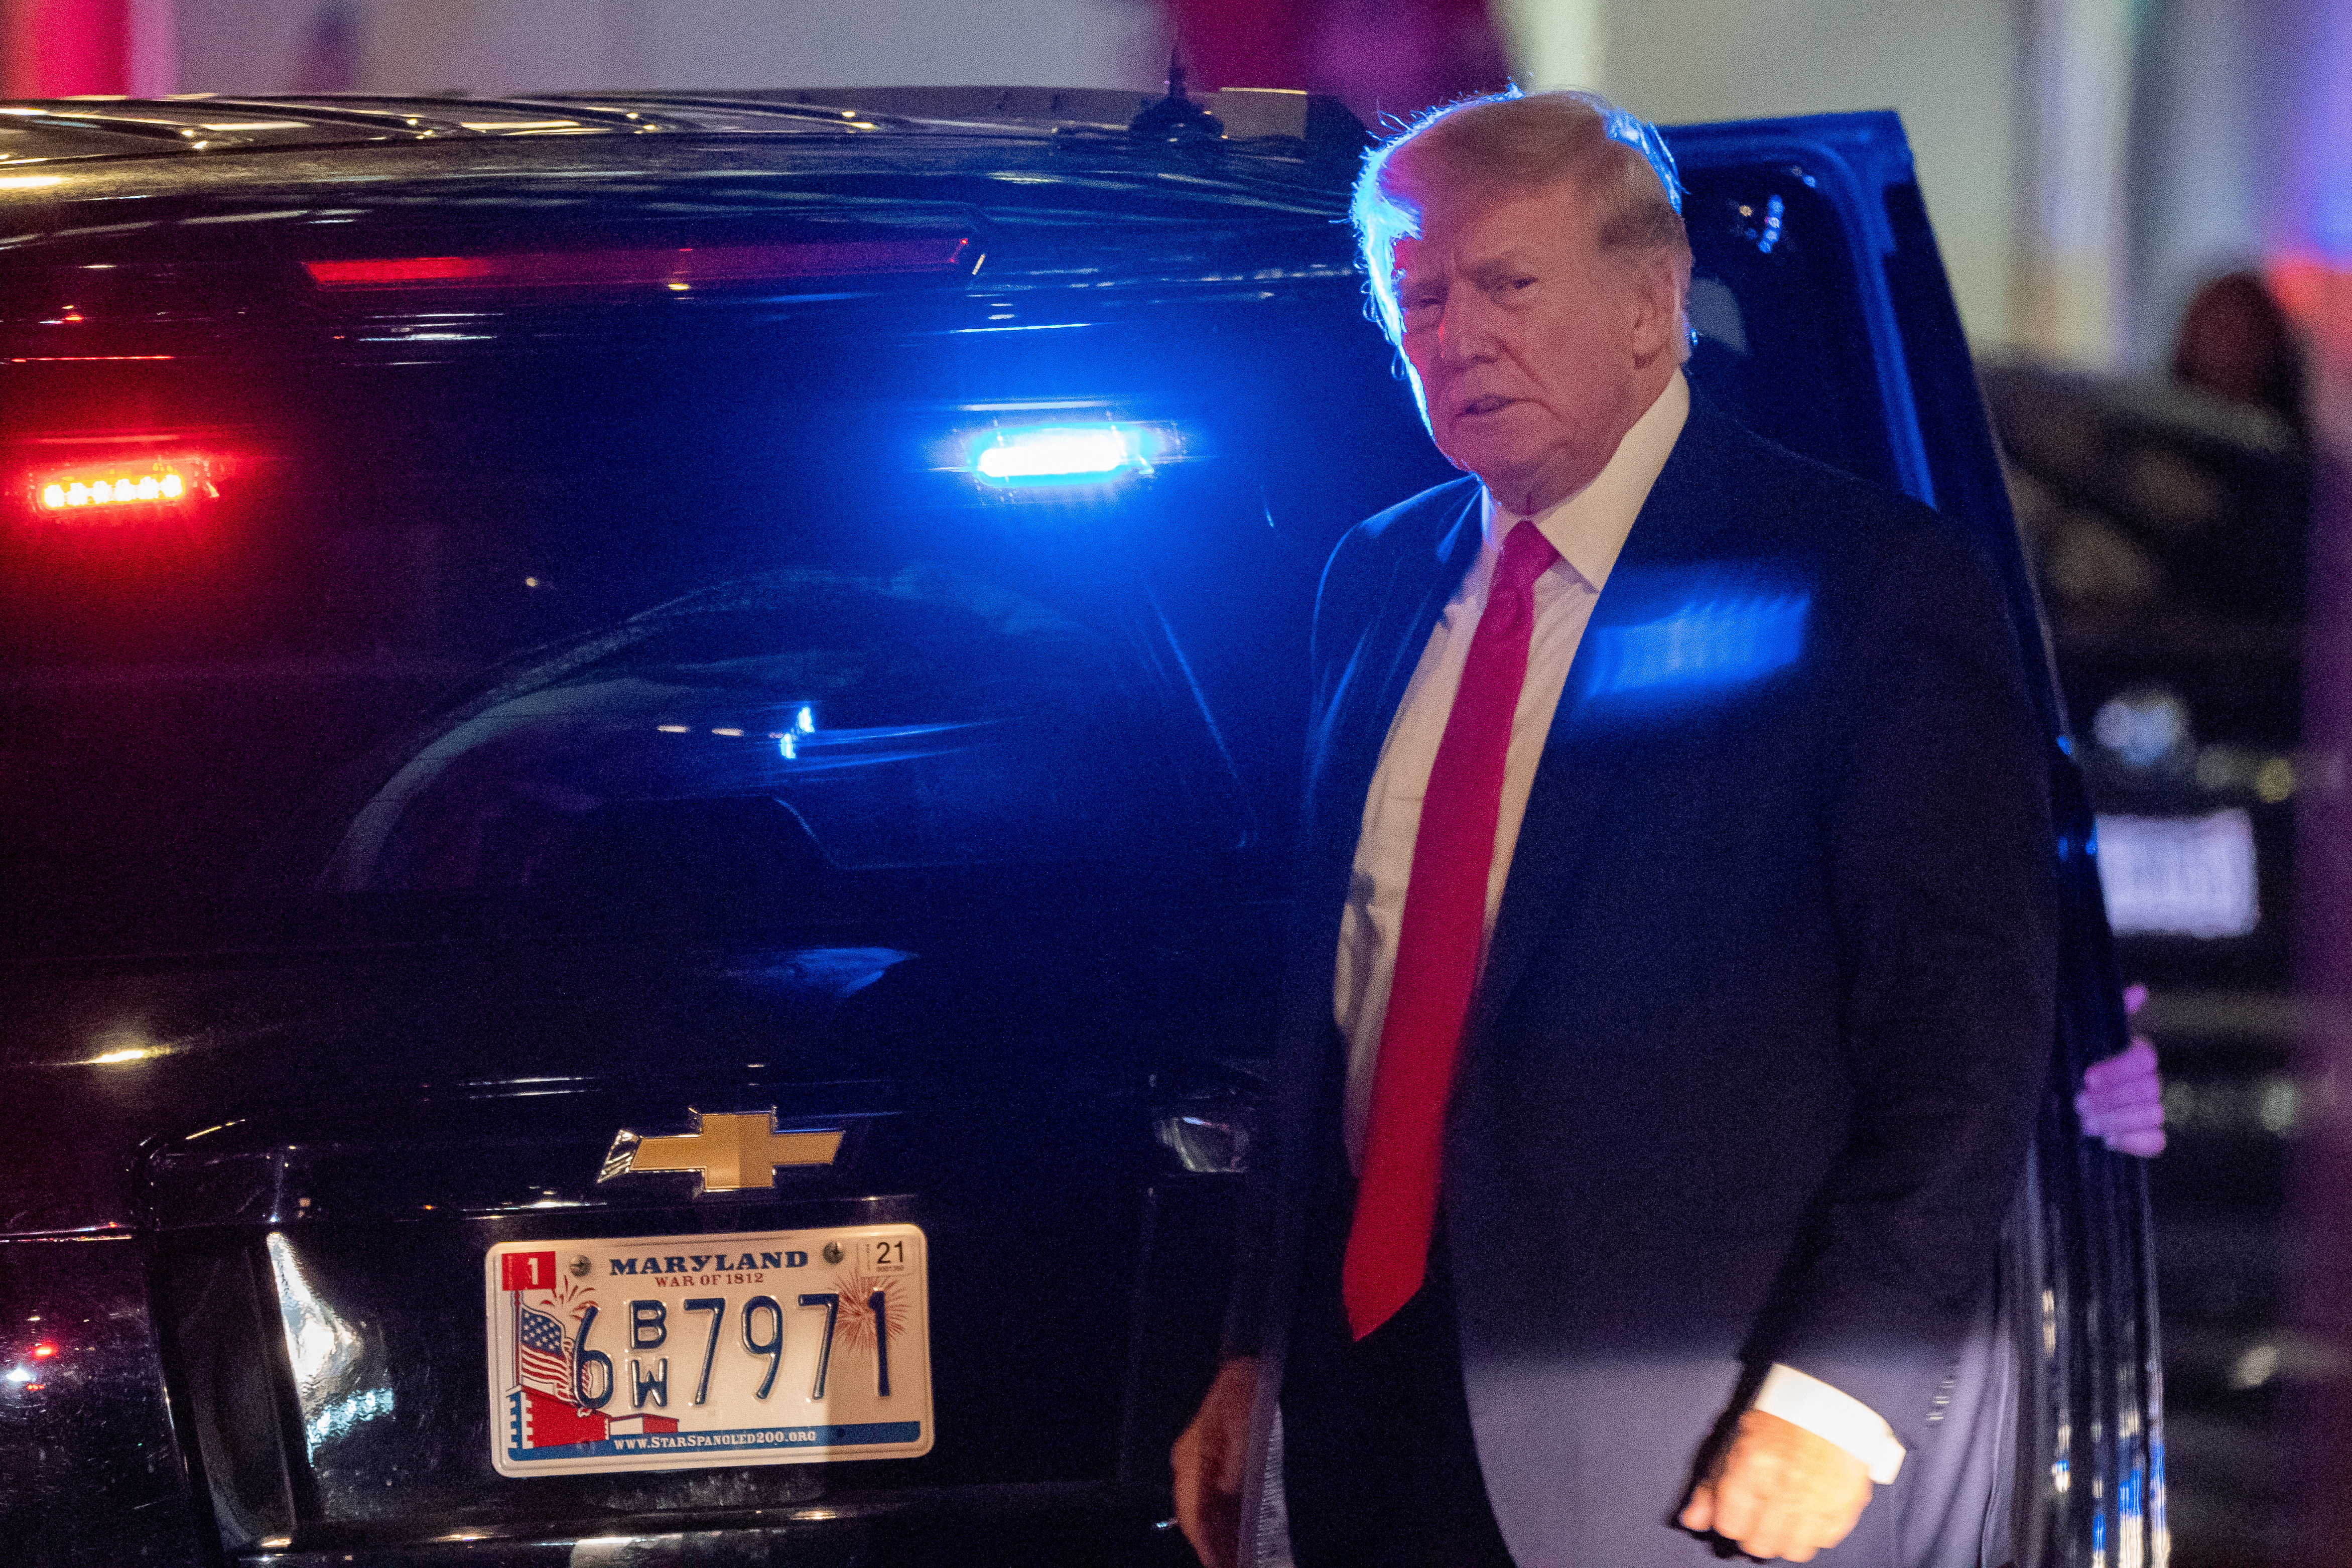 Donald Trump arrives at Trump Tower the day after FBI agents raided his Mar-a-Lago Palm Beach home, in New York City, U.S., August 9, 2022. REUTERS/David 'Dee' Delgado